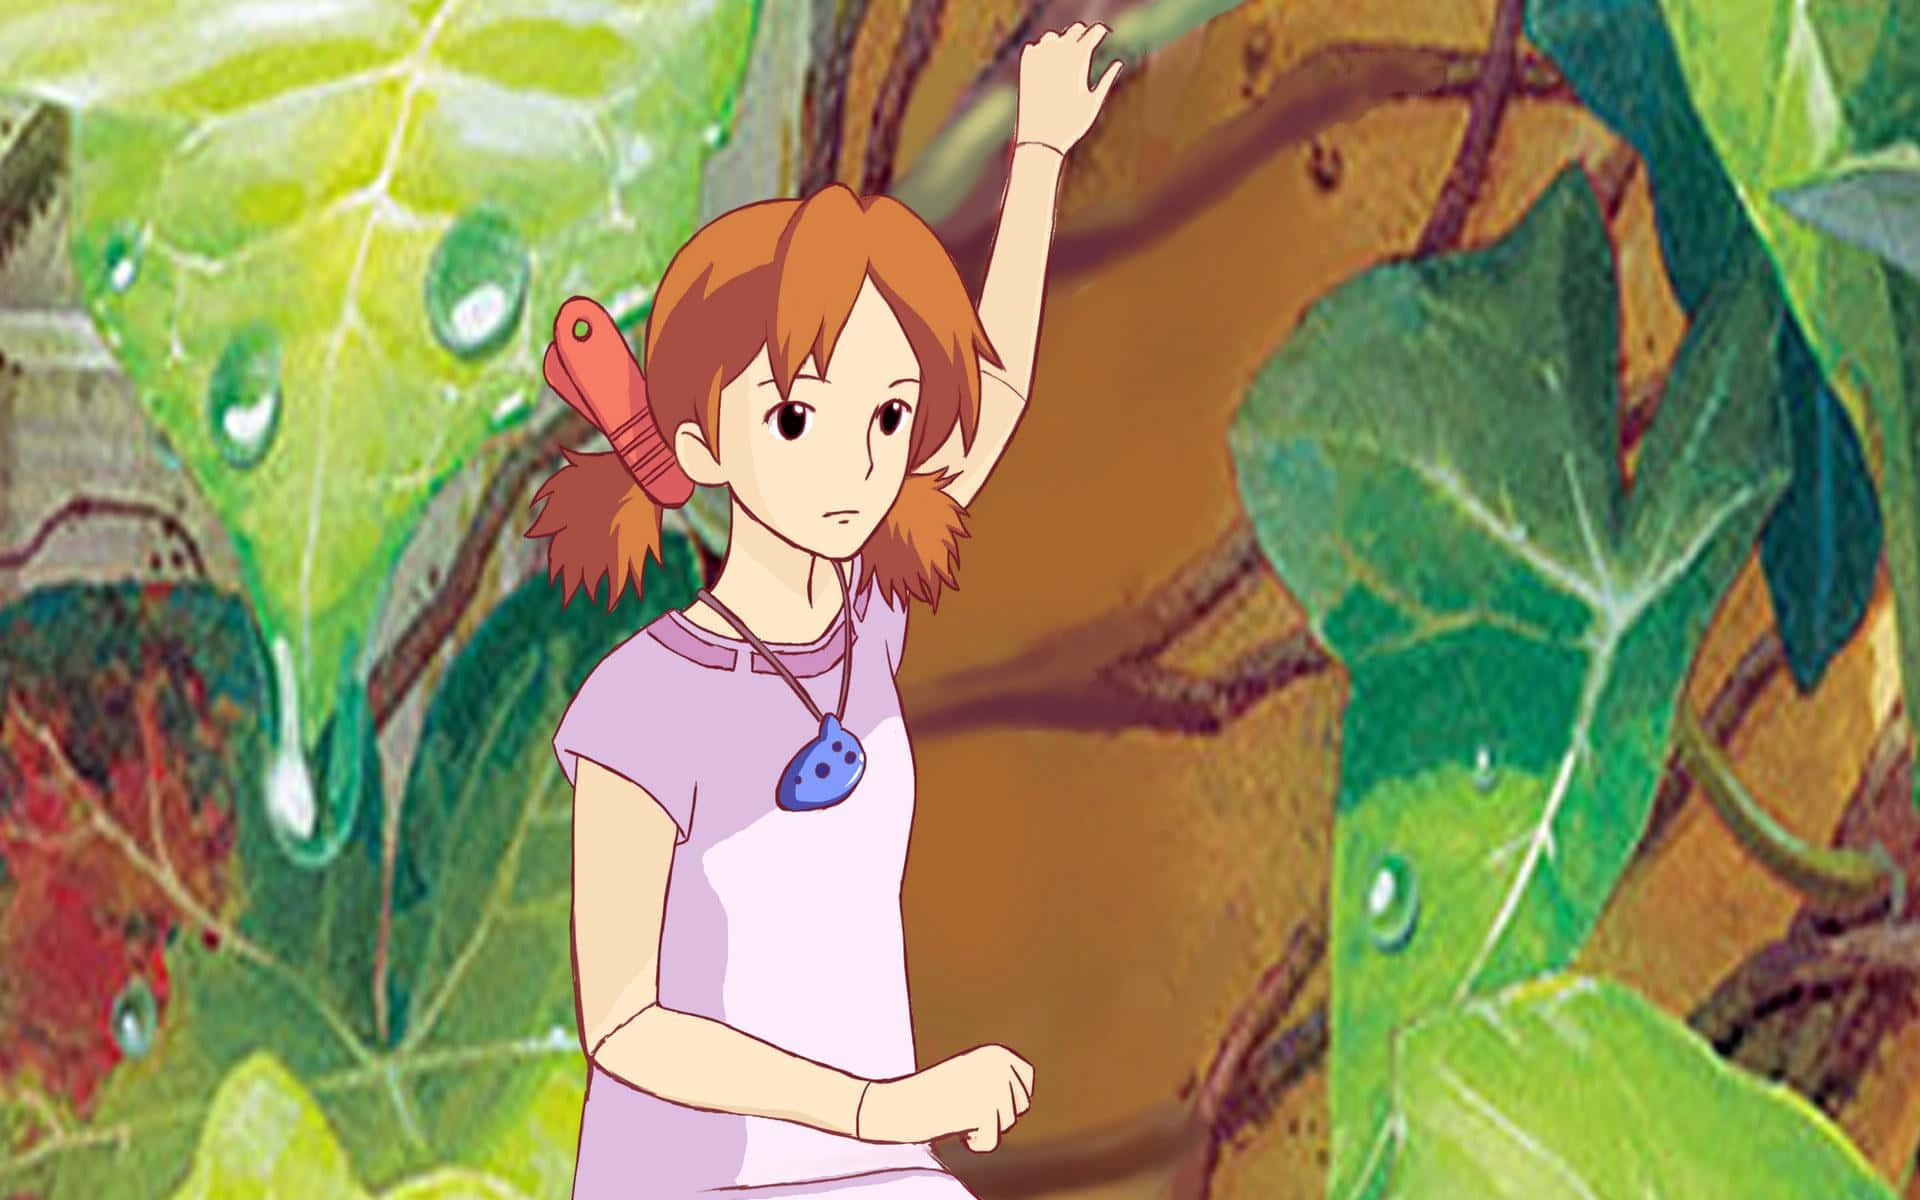 Arrietty and Shawn exploring their miniature world in The Secret World of Arrietty Wallpaper